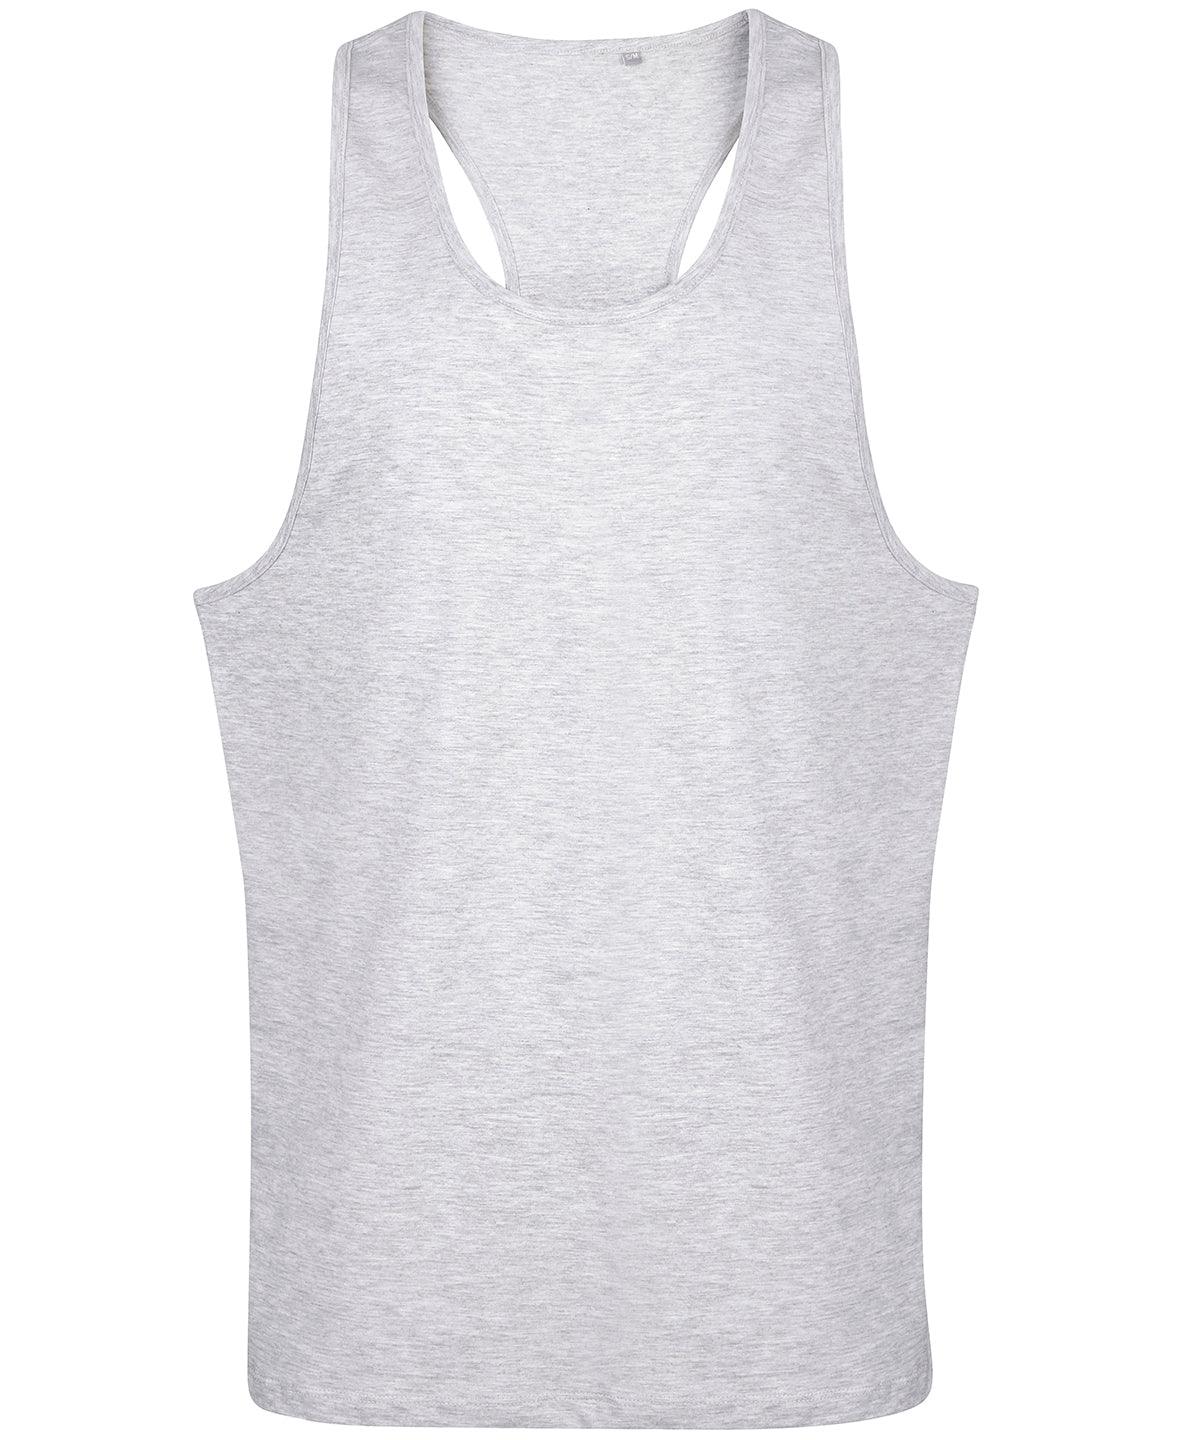 Heather Grey - Tanx vest top Vests Last Chance to Buy Raladeal - High Stock, Rebrandable, T-Shirts & Vests Schoolwear Centres